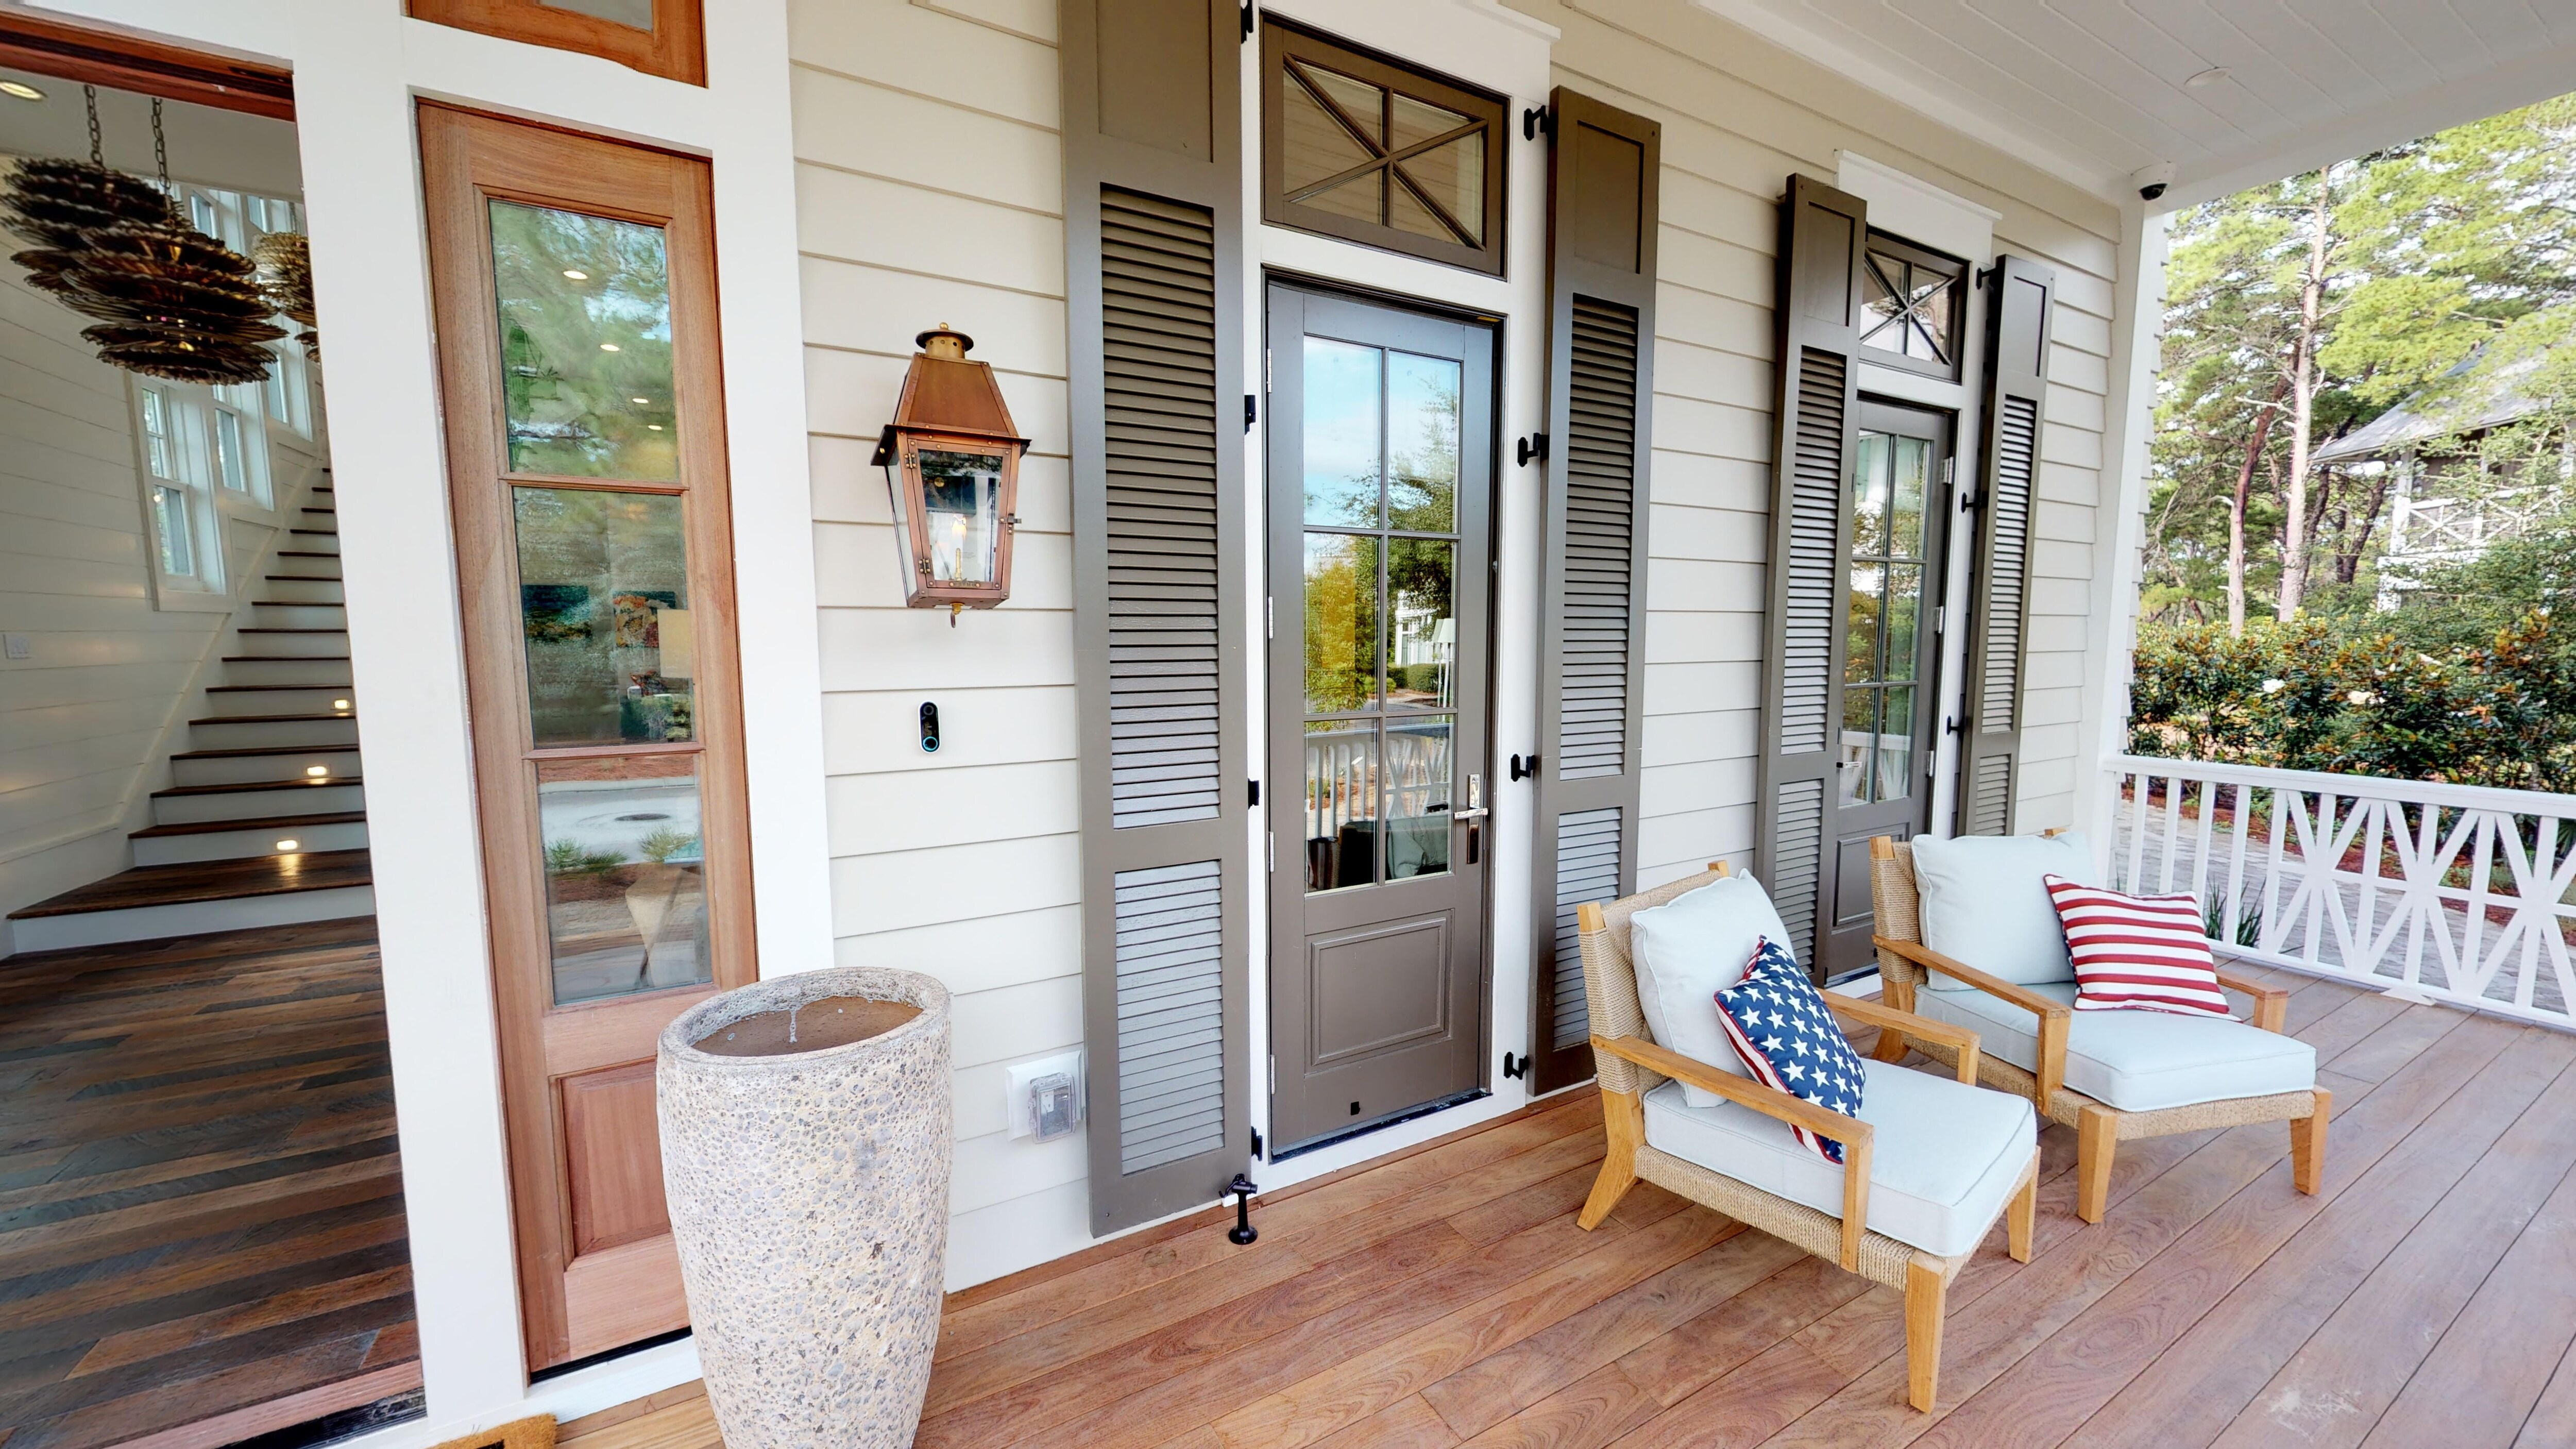 Welcoming Front Porch to "Stress Free'